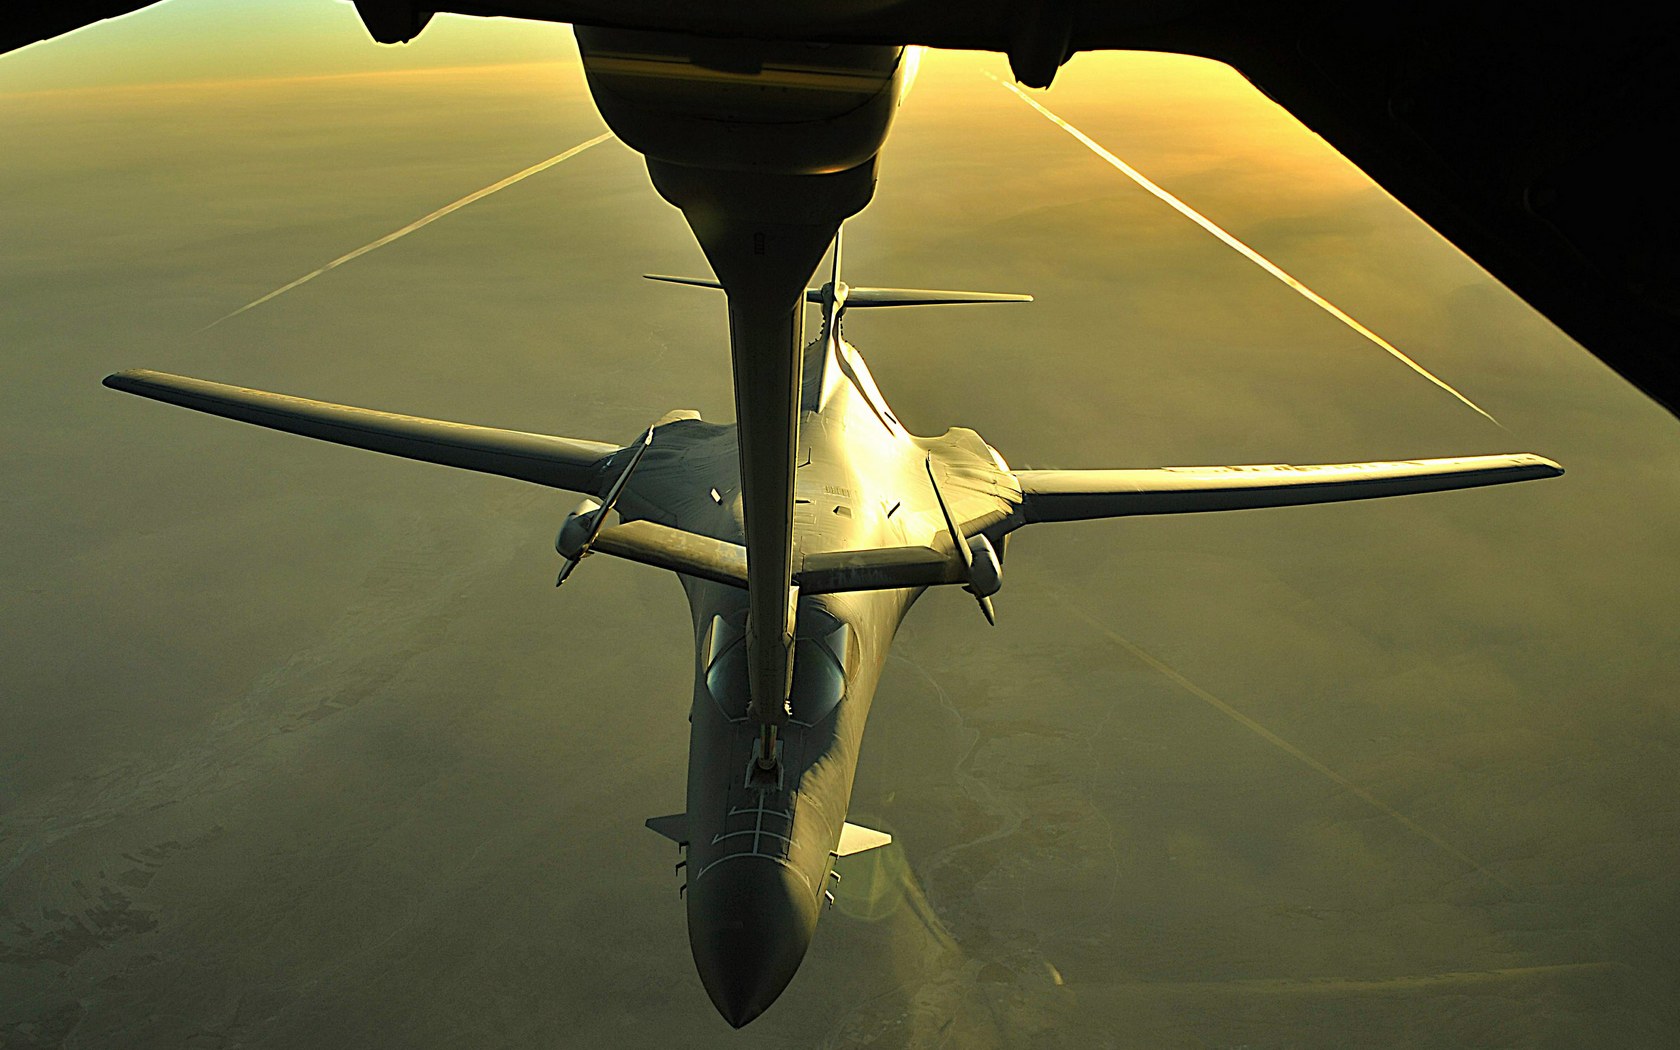 Download full size Aerial Refueling Of A B-1B Lancer Military Airplanes wallpaper / 1680x1050